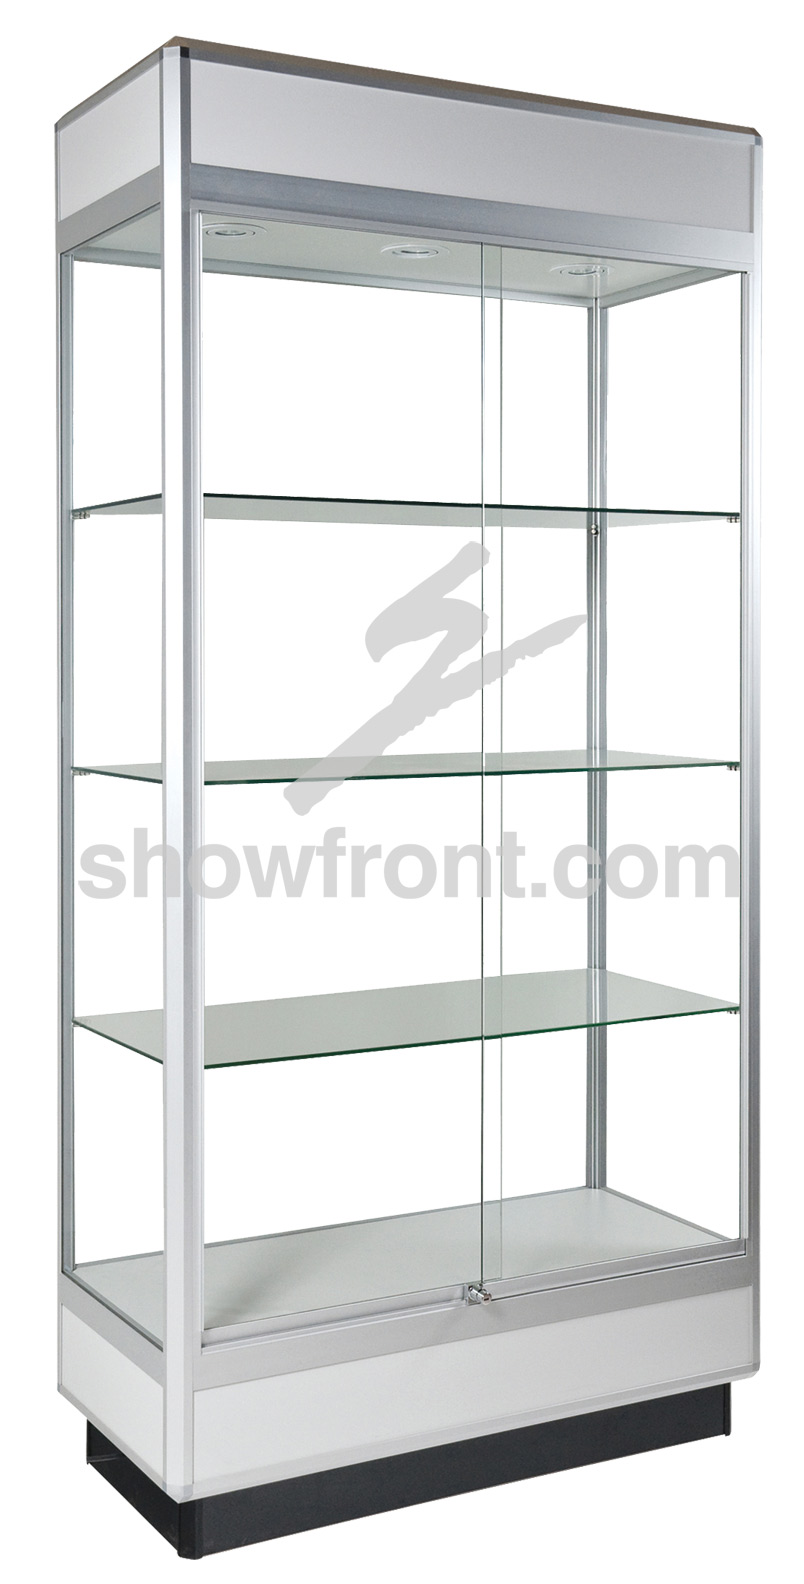 Ideal as for School Trophies and Memorabilia - TPFL 1000 Display Cabinet from Showfront